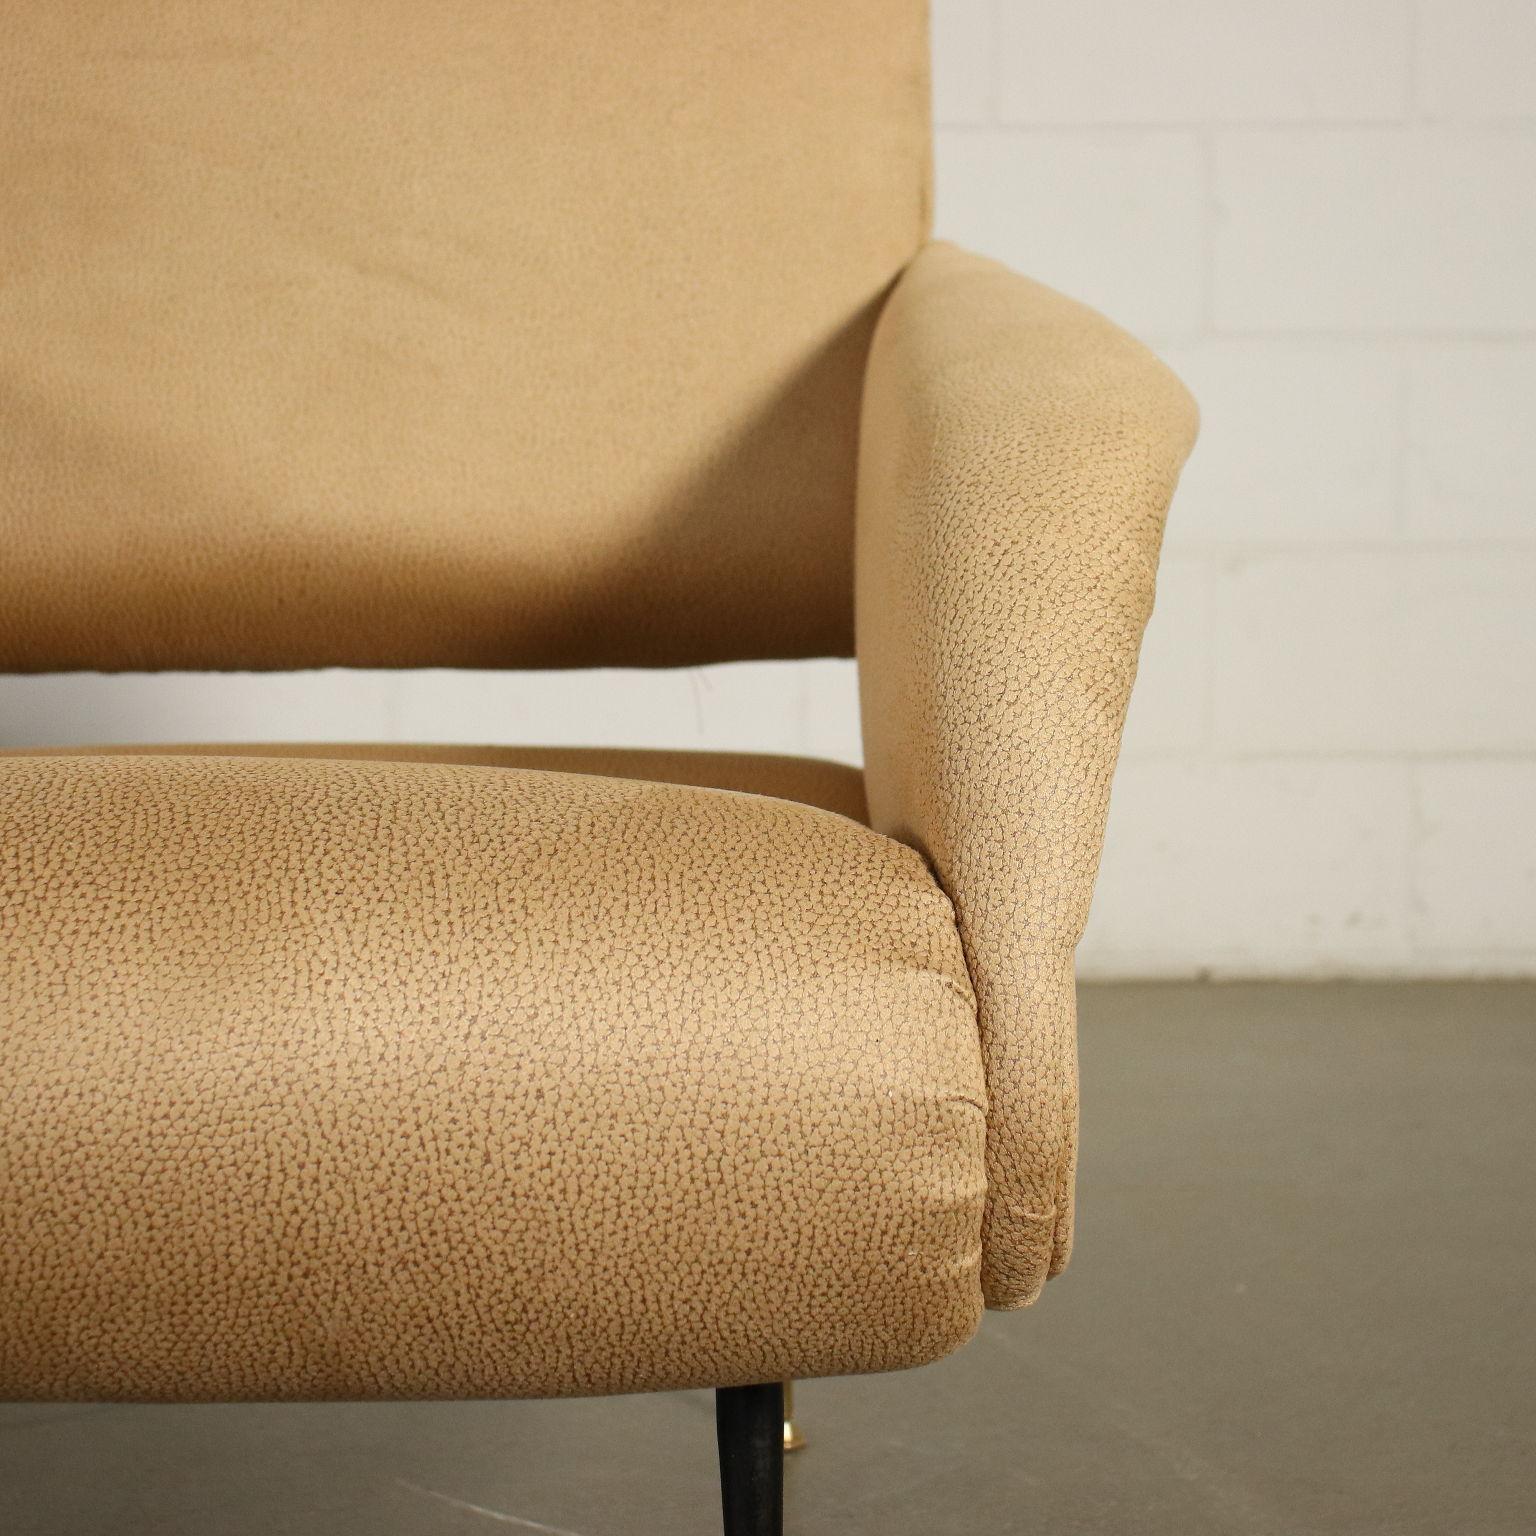 20th Century Pair of Armchairs Foam Leatherette, Italy, 1950s 1960s For Sale